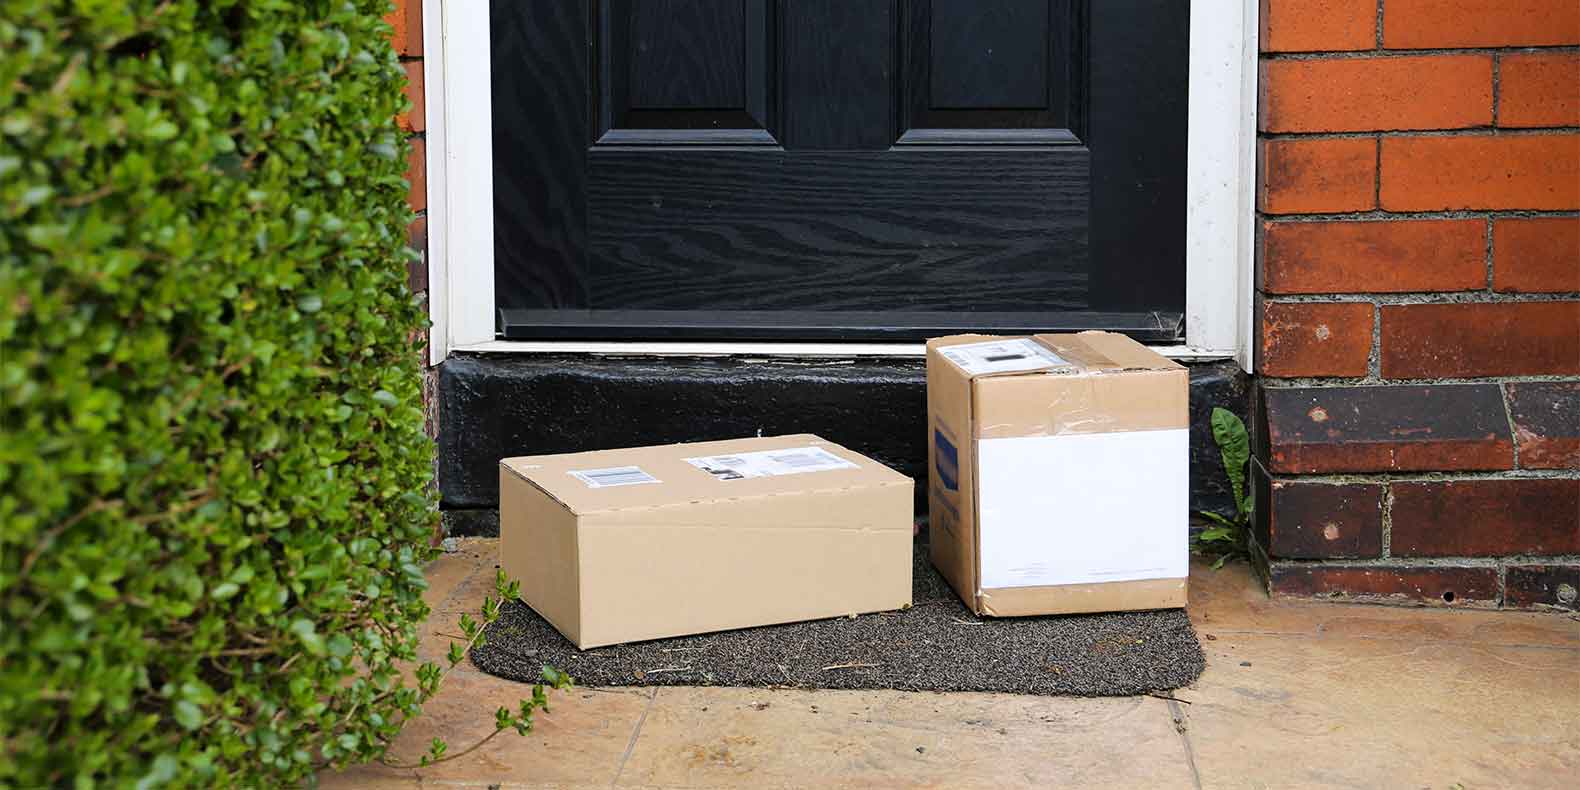 How to Prevent Porch Pirates from Stealing Your Packages